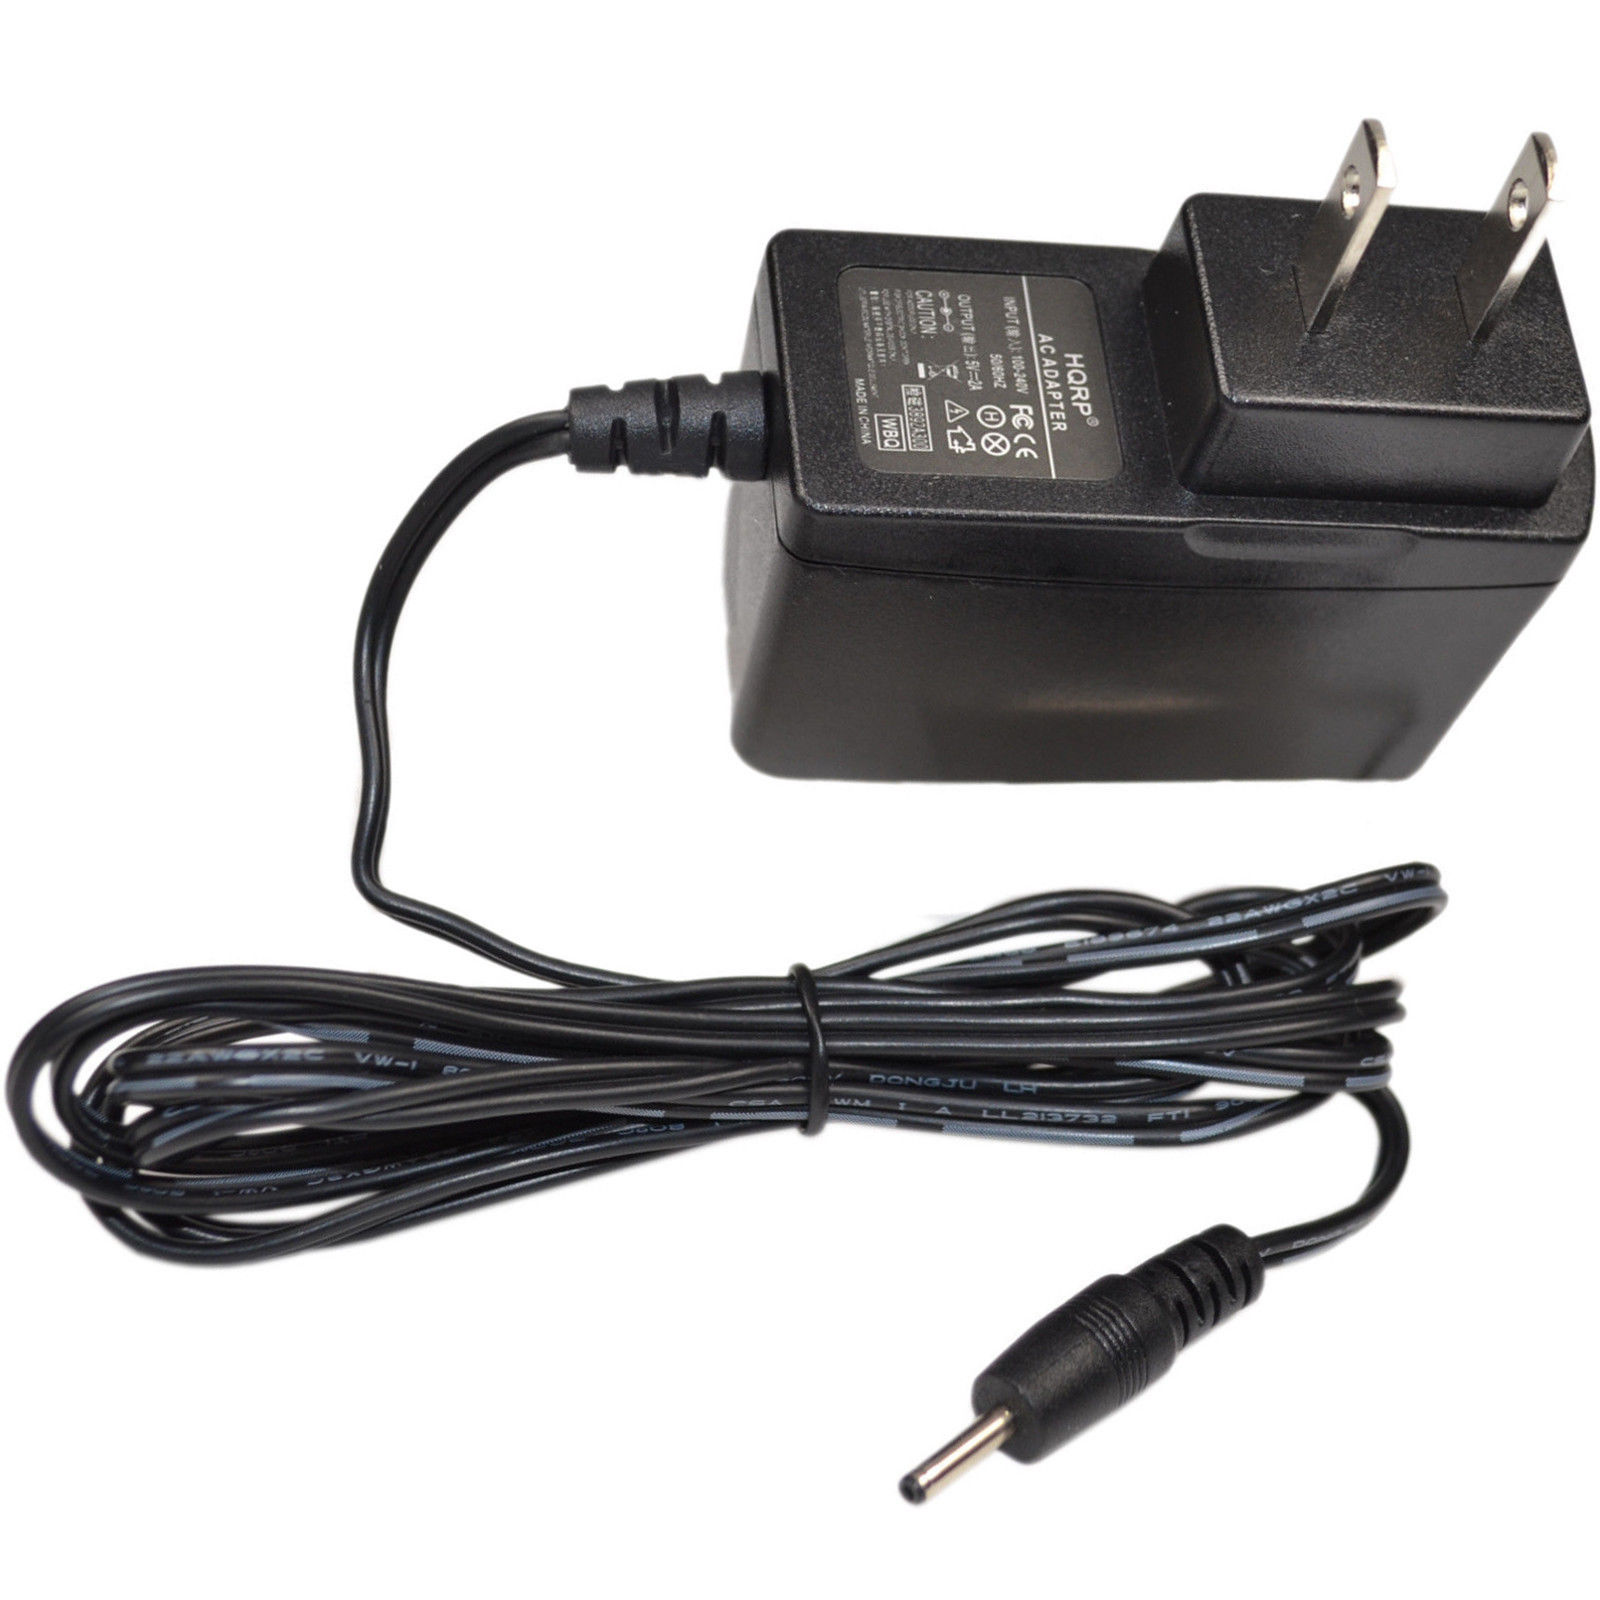 HQRP AC Adapter Charger for PSU-TAB7012 Tablo Android Tablet PC, Power Supply Cord